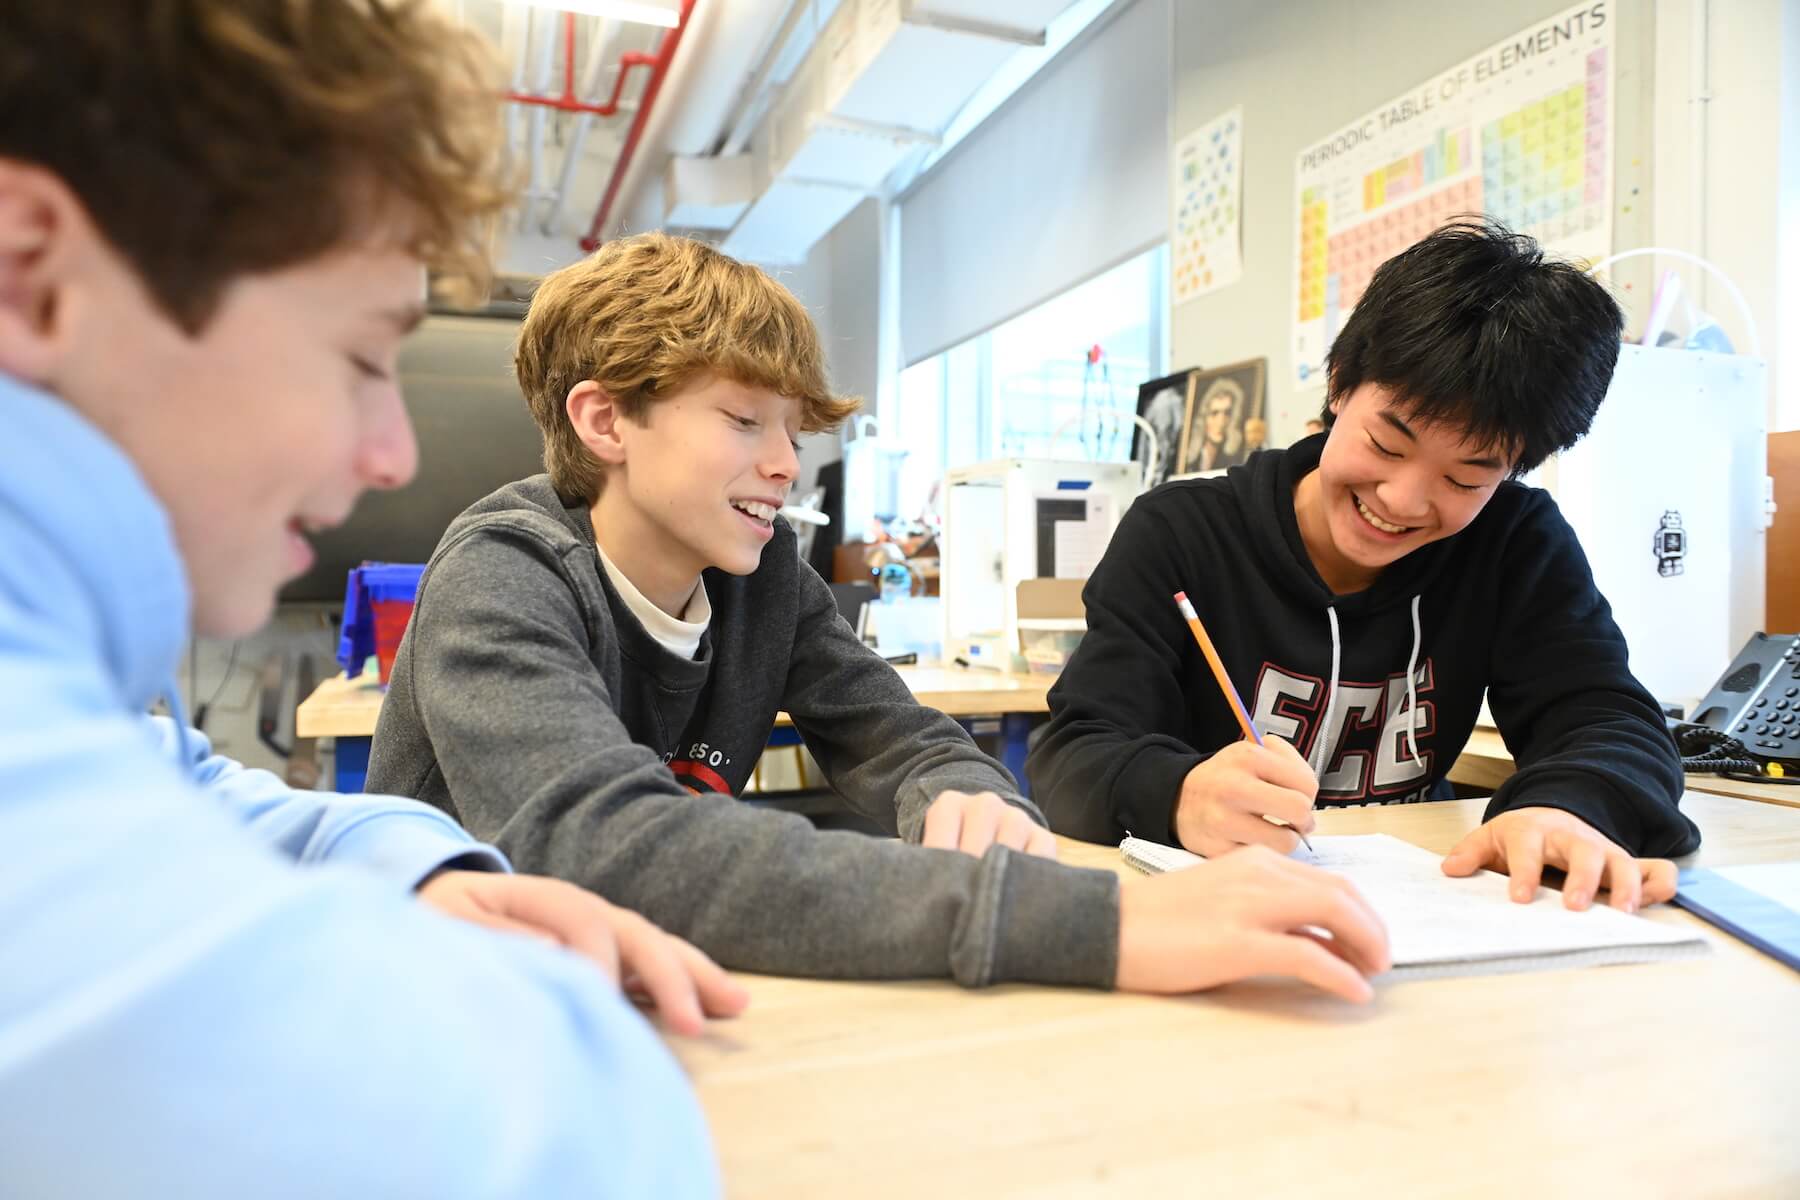 Ethical Culture Fieldston School students studying together in Fieldston Middle